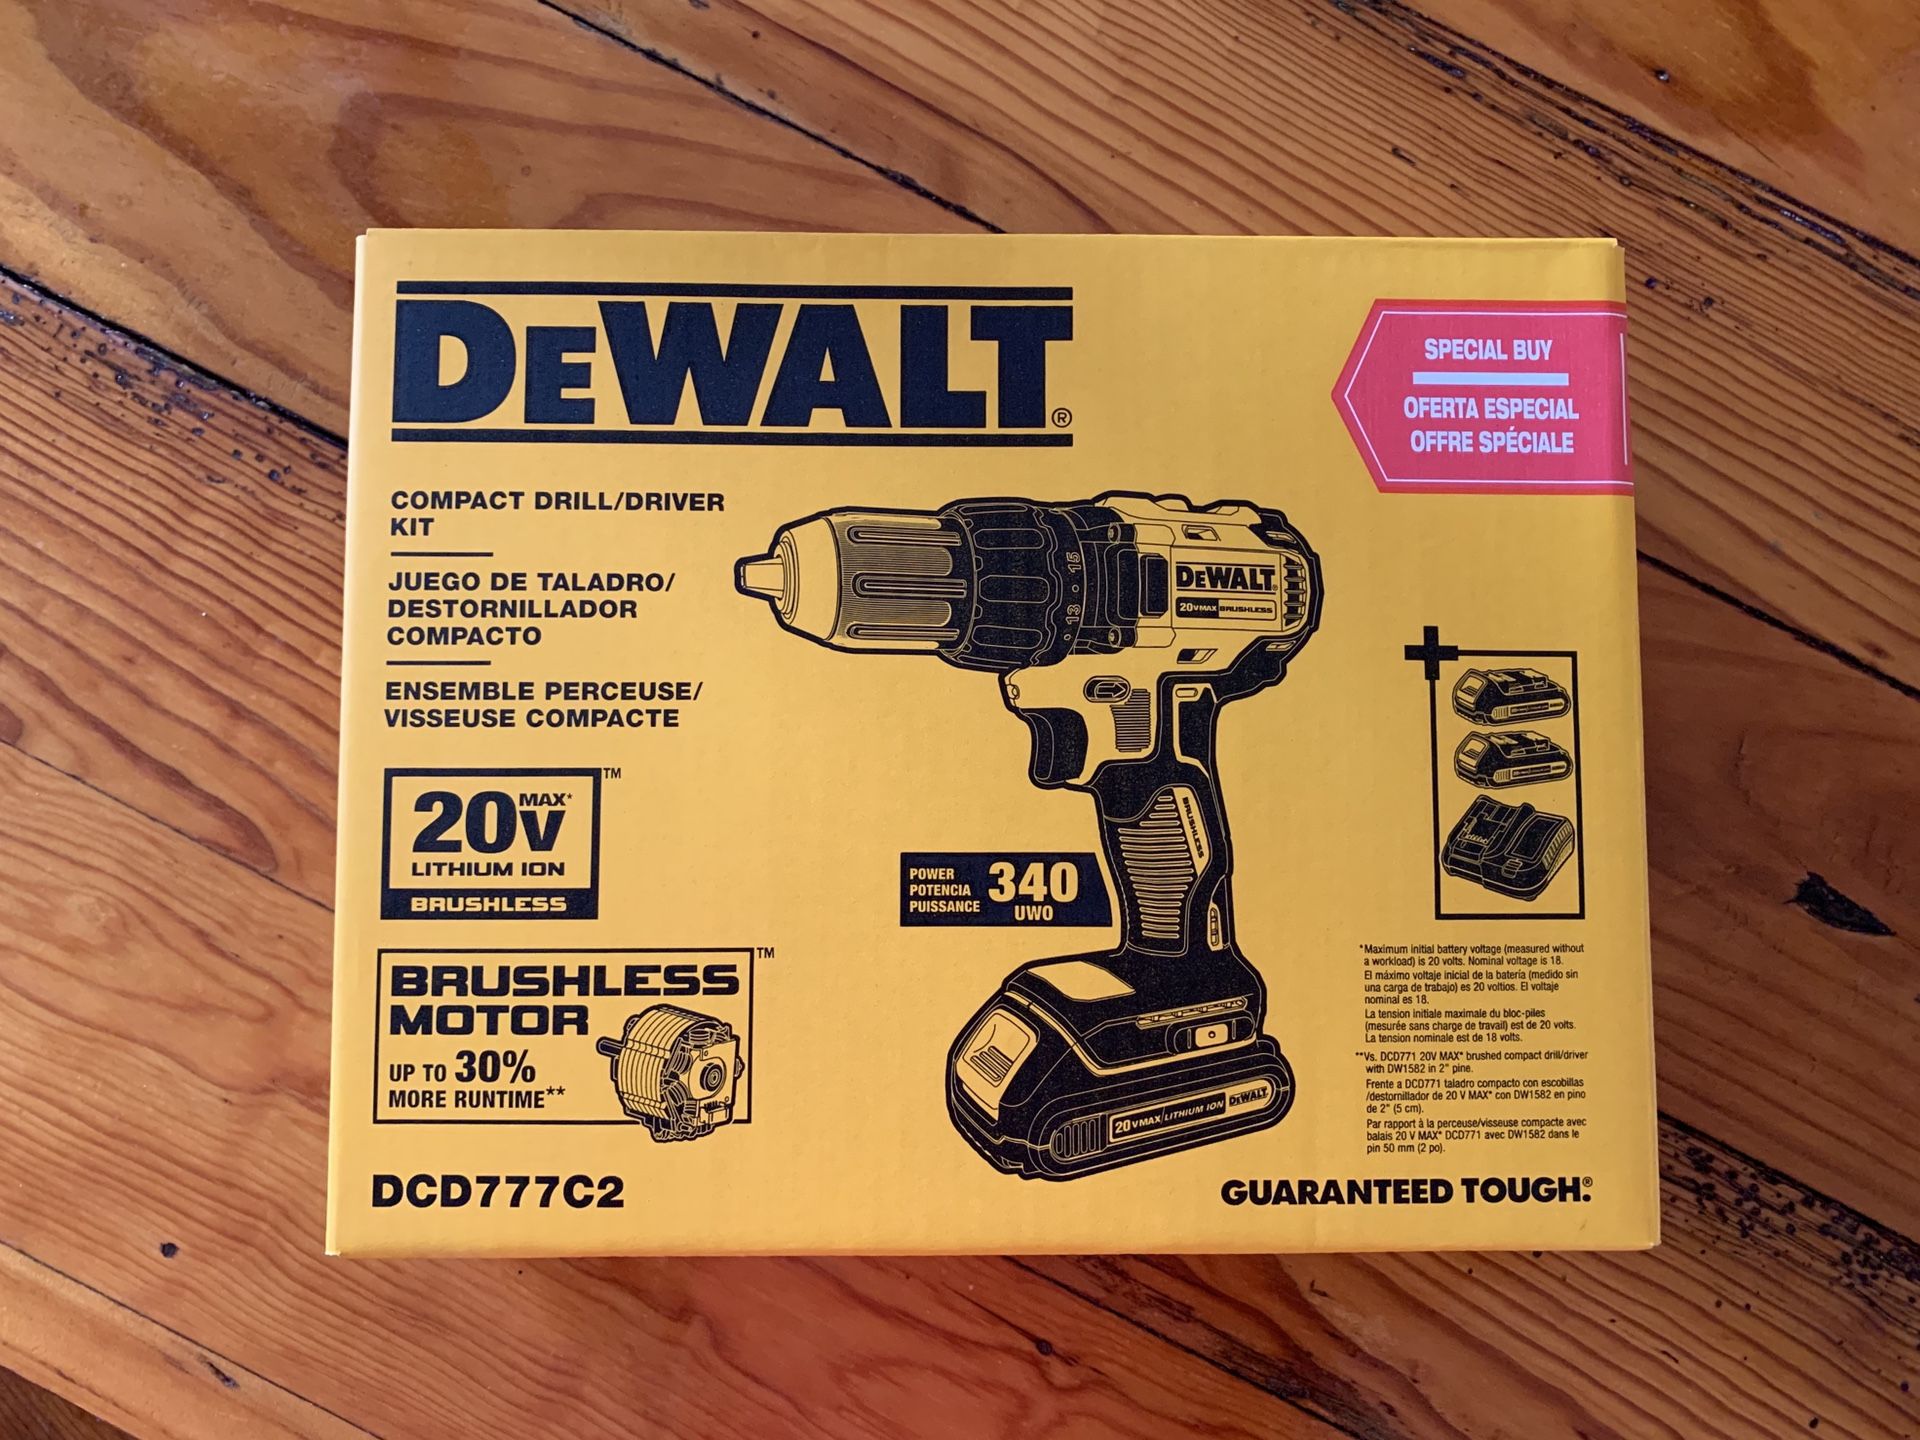 BRAND NEW IN BOX - DeWalt DCD777C2 20V Brushless Motor Compact Drill/Driver Kit - includes 2 batteries, charger & bag! 🛠 - GREAT MOM OR DAD’S DAY 🎁